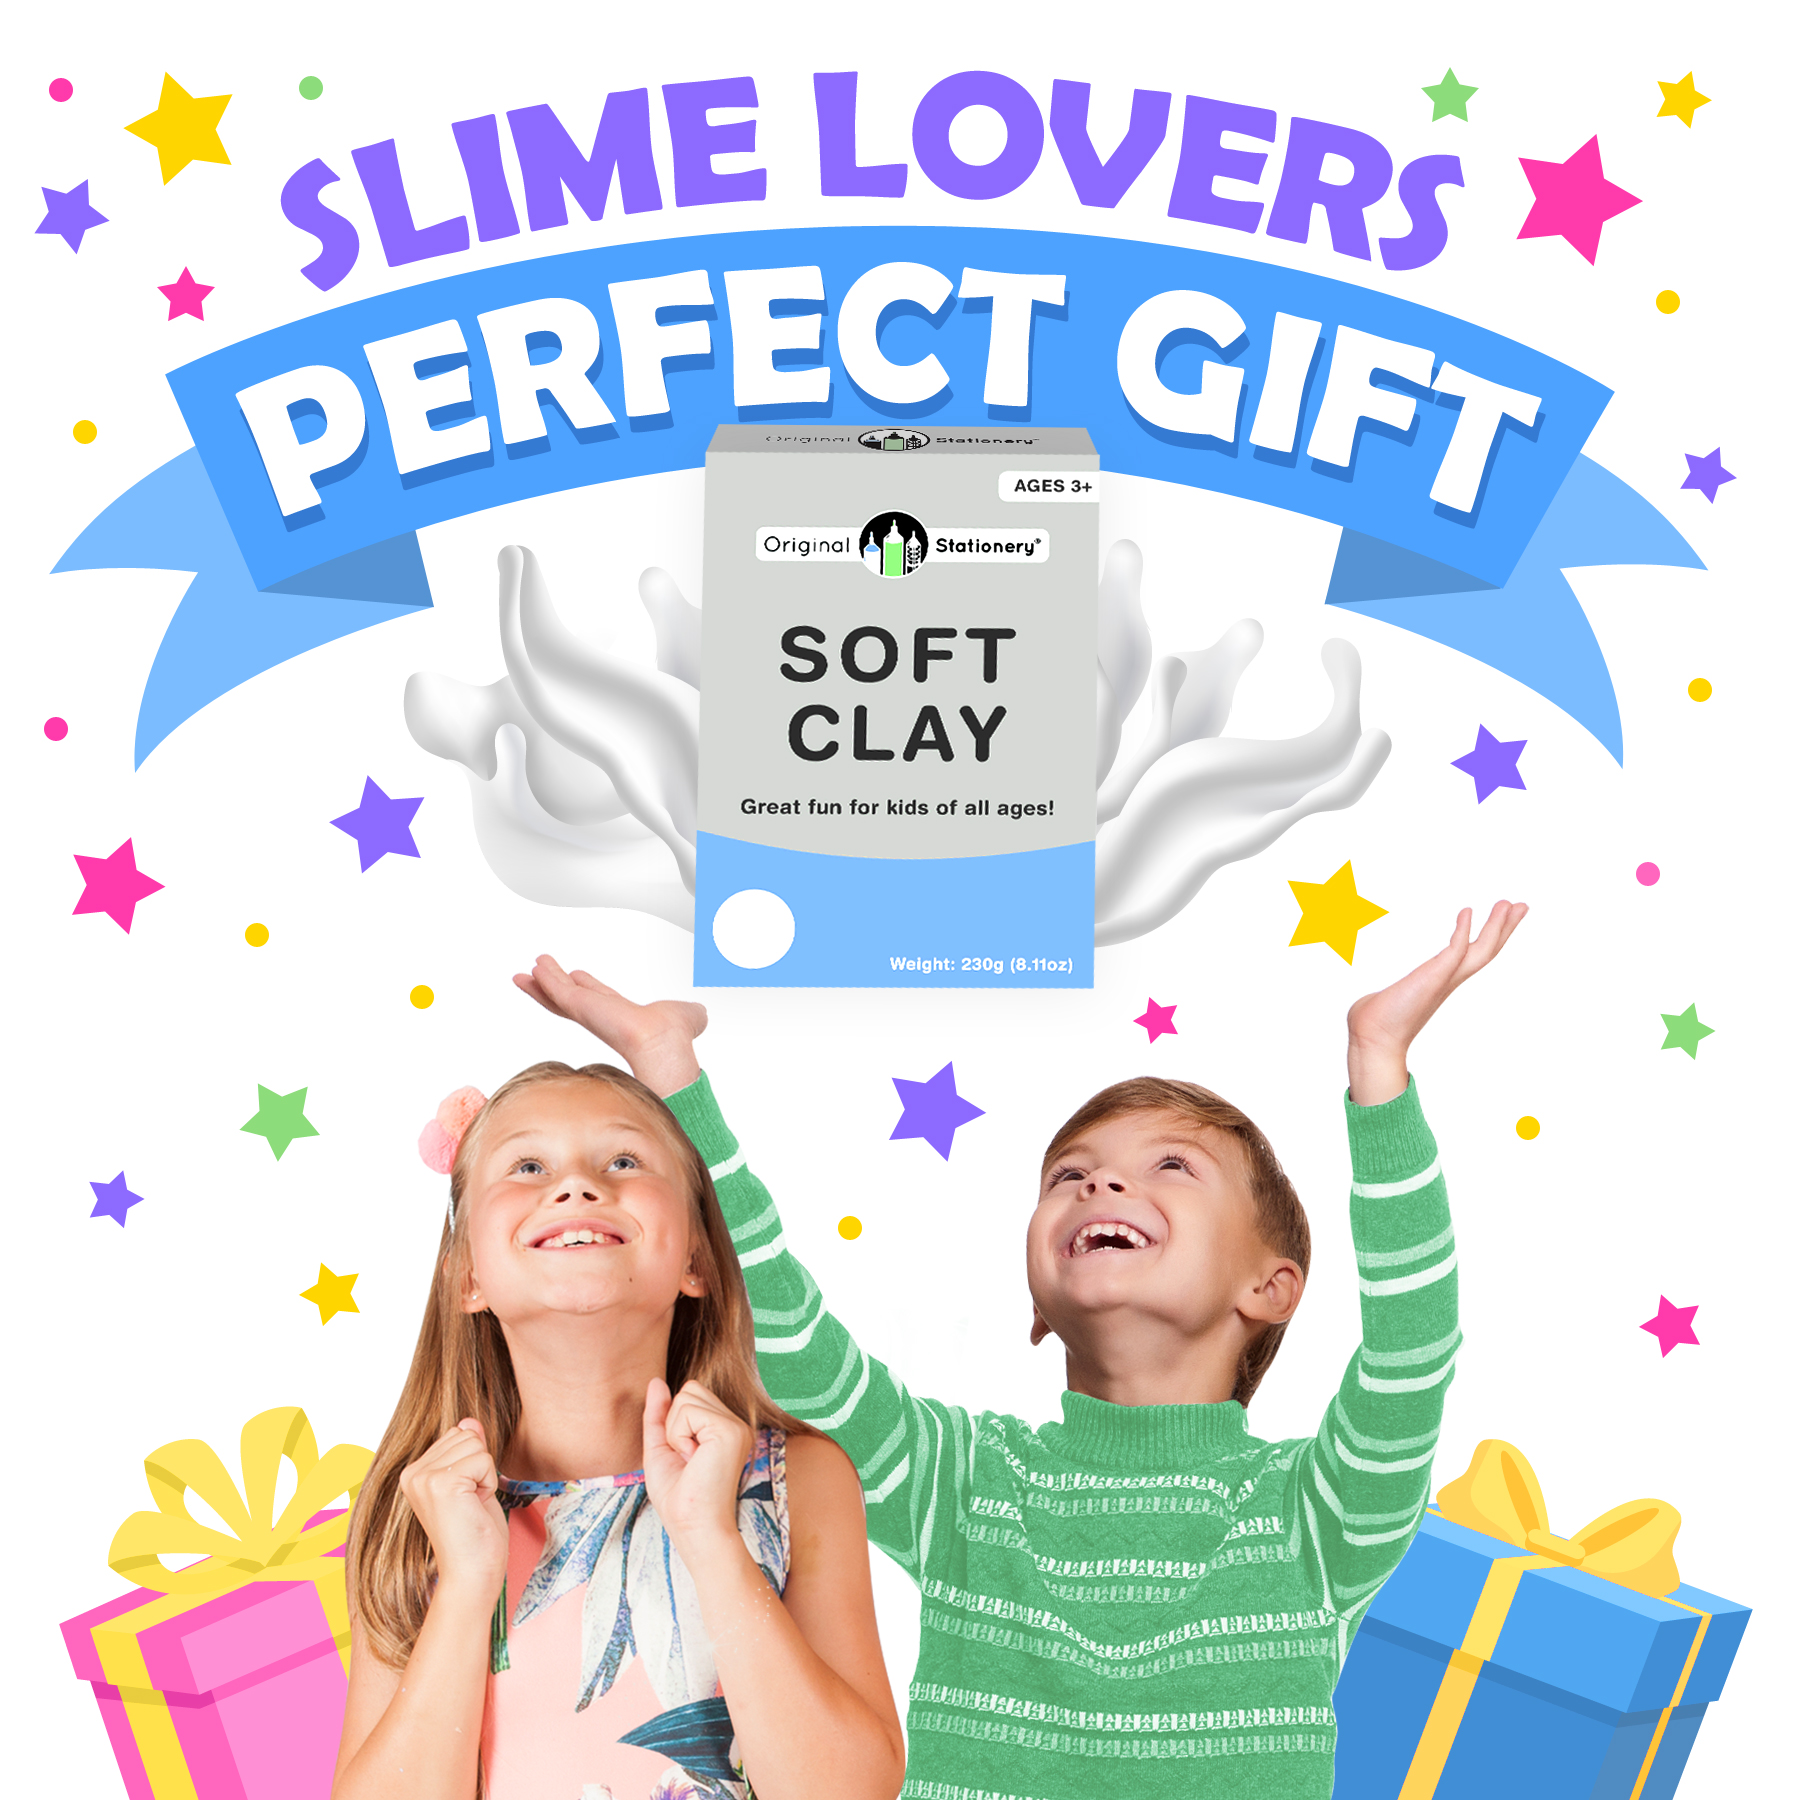 Original Stationery Soft Clay for Slime Supplies, Modeling Foam Clay & White Clay for Kids, Add to Glue & Shaving Foam to Make Butter Slime,1.3 lbs/